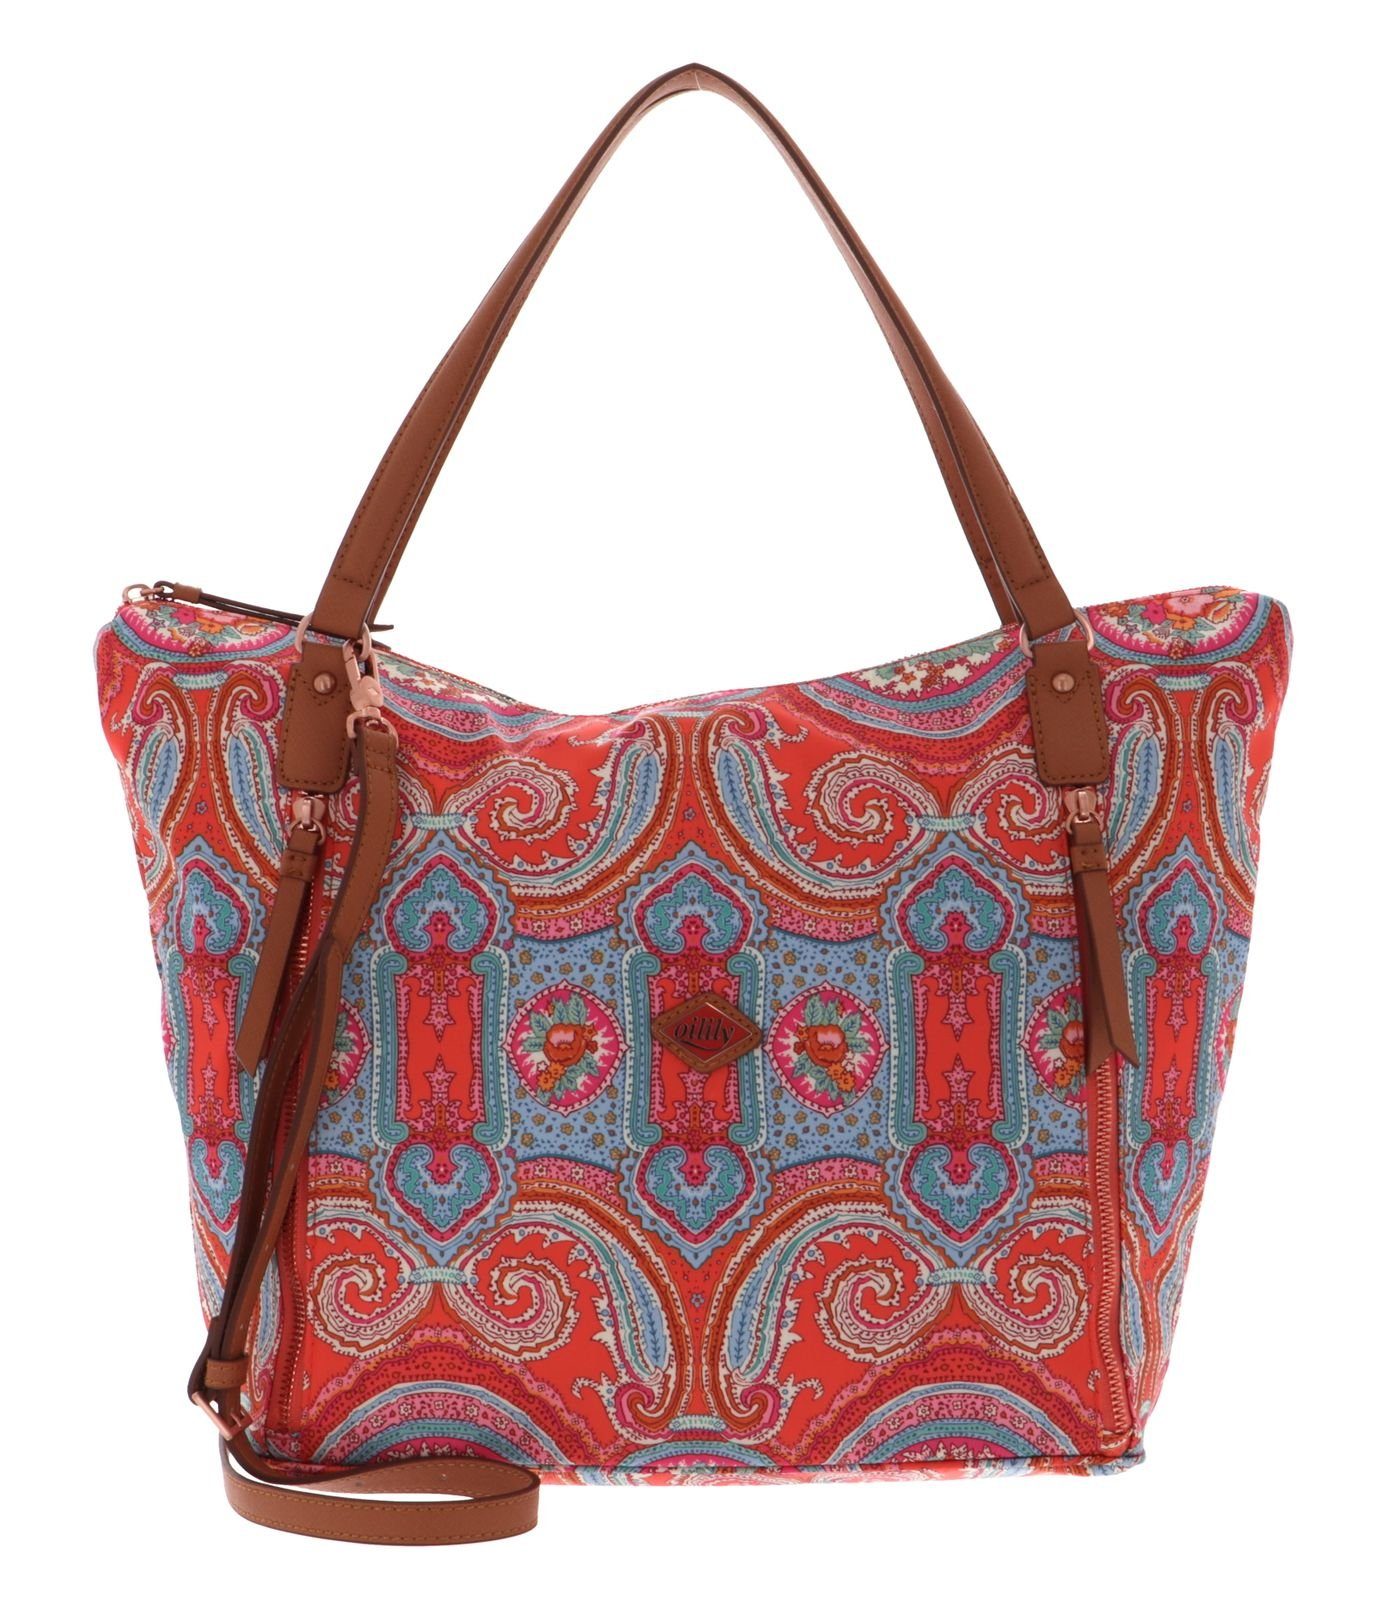 Rose Coral Paisley Hot Oilily City Shopper